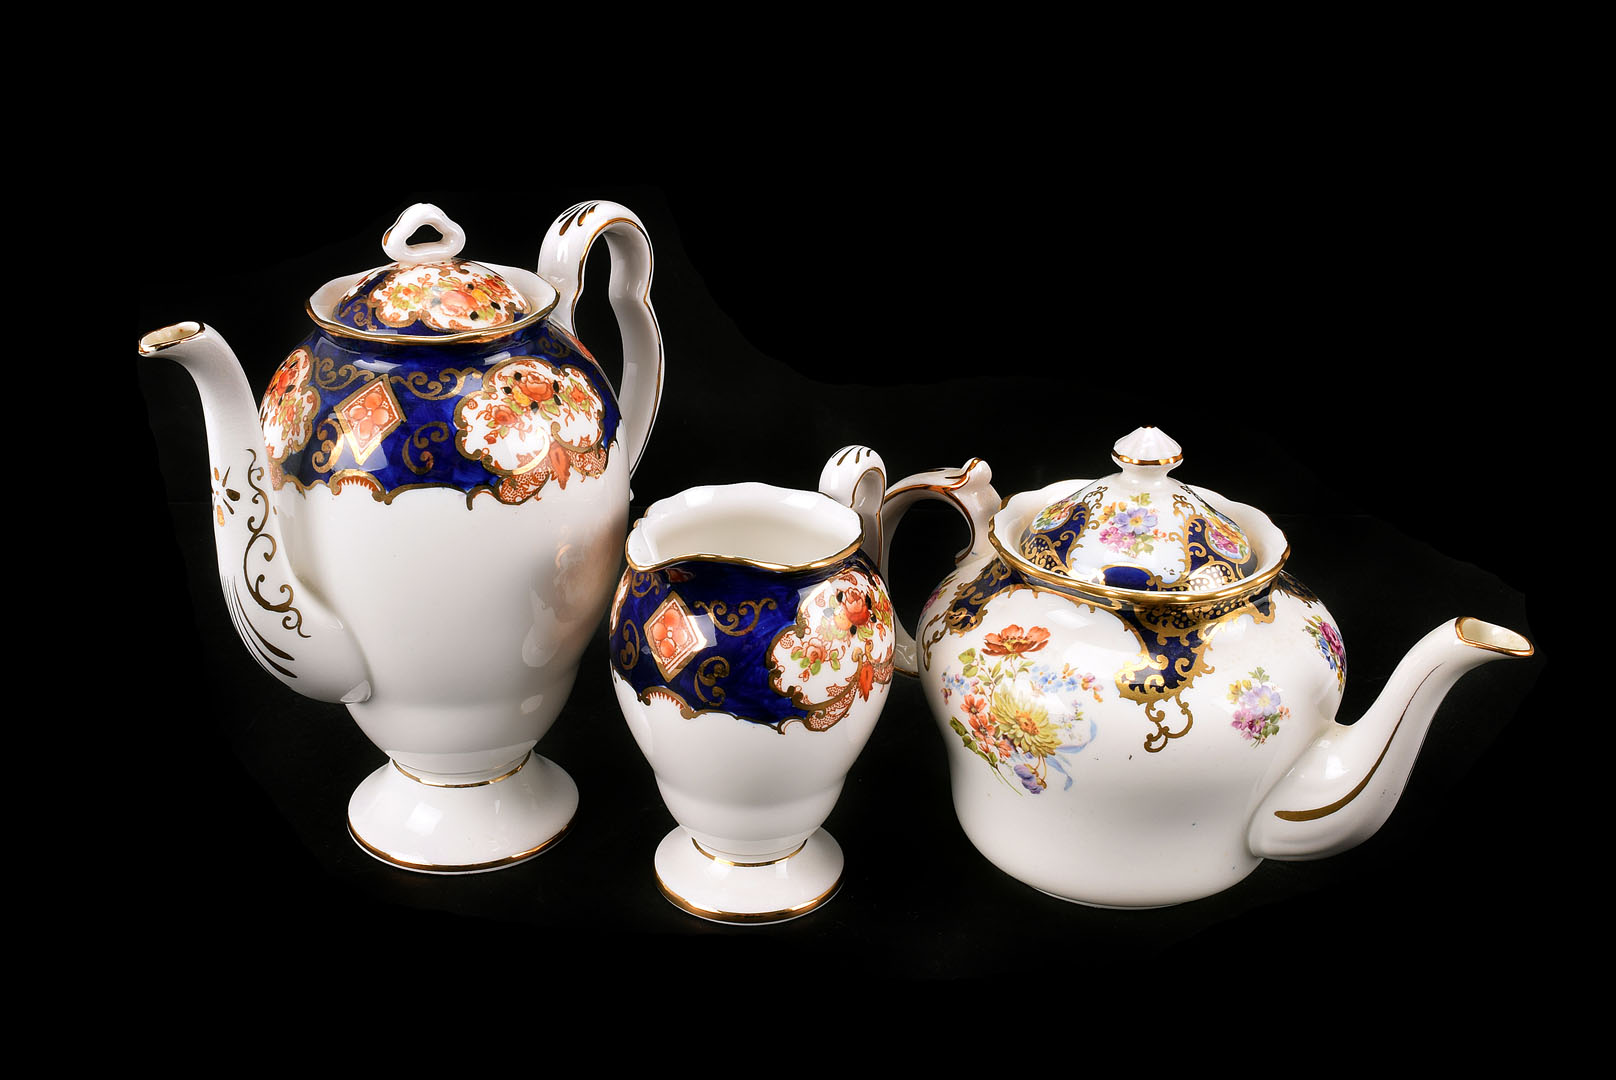 A Mixed floral part tea service, mostly of a blue floral and gilt decoration with items from both